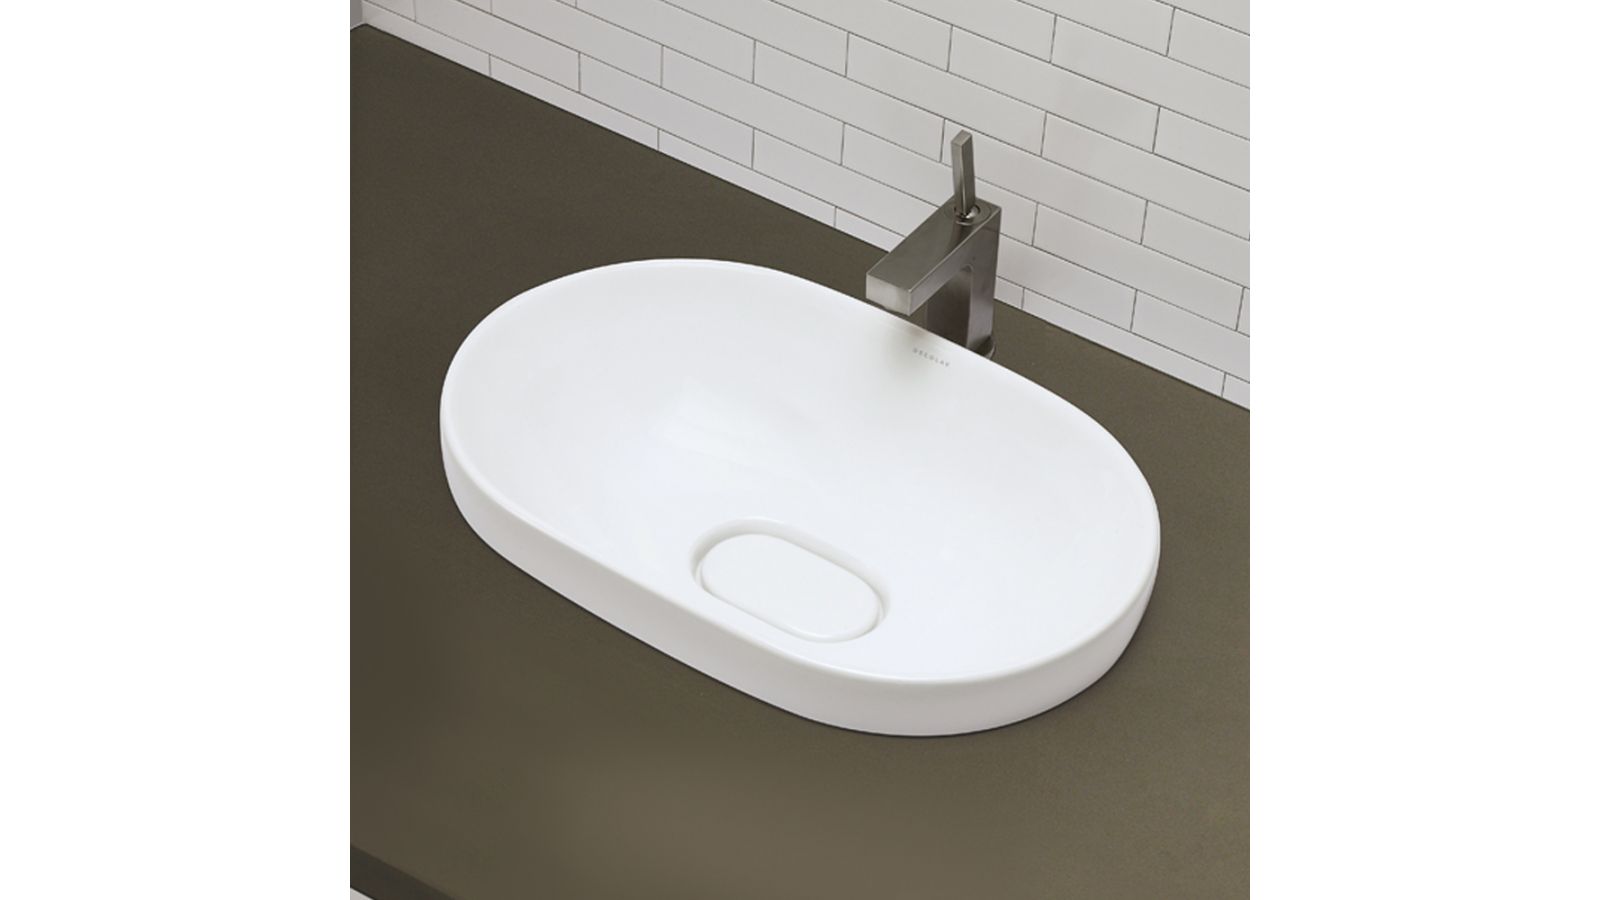 1457 Semi-Recessed Oval Lavatory White with Vitreous China Drain Cover 